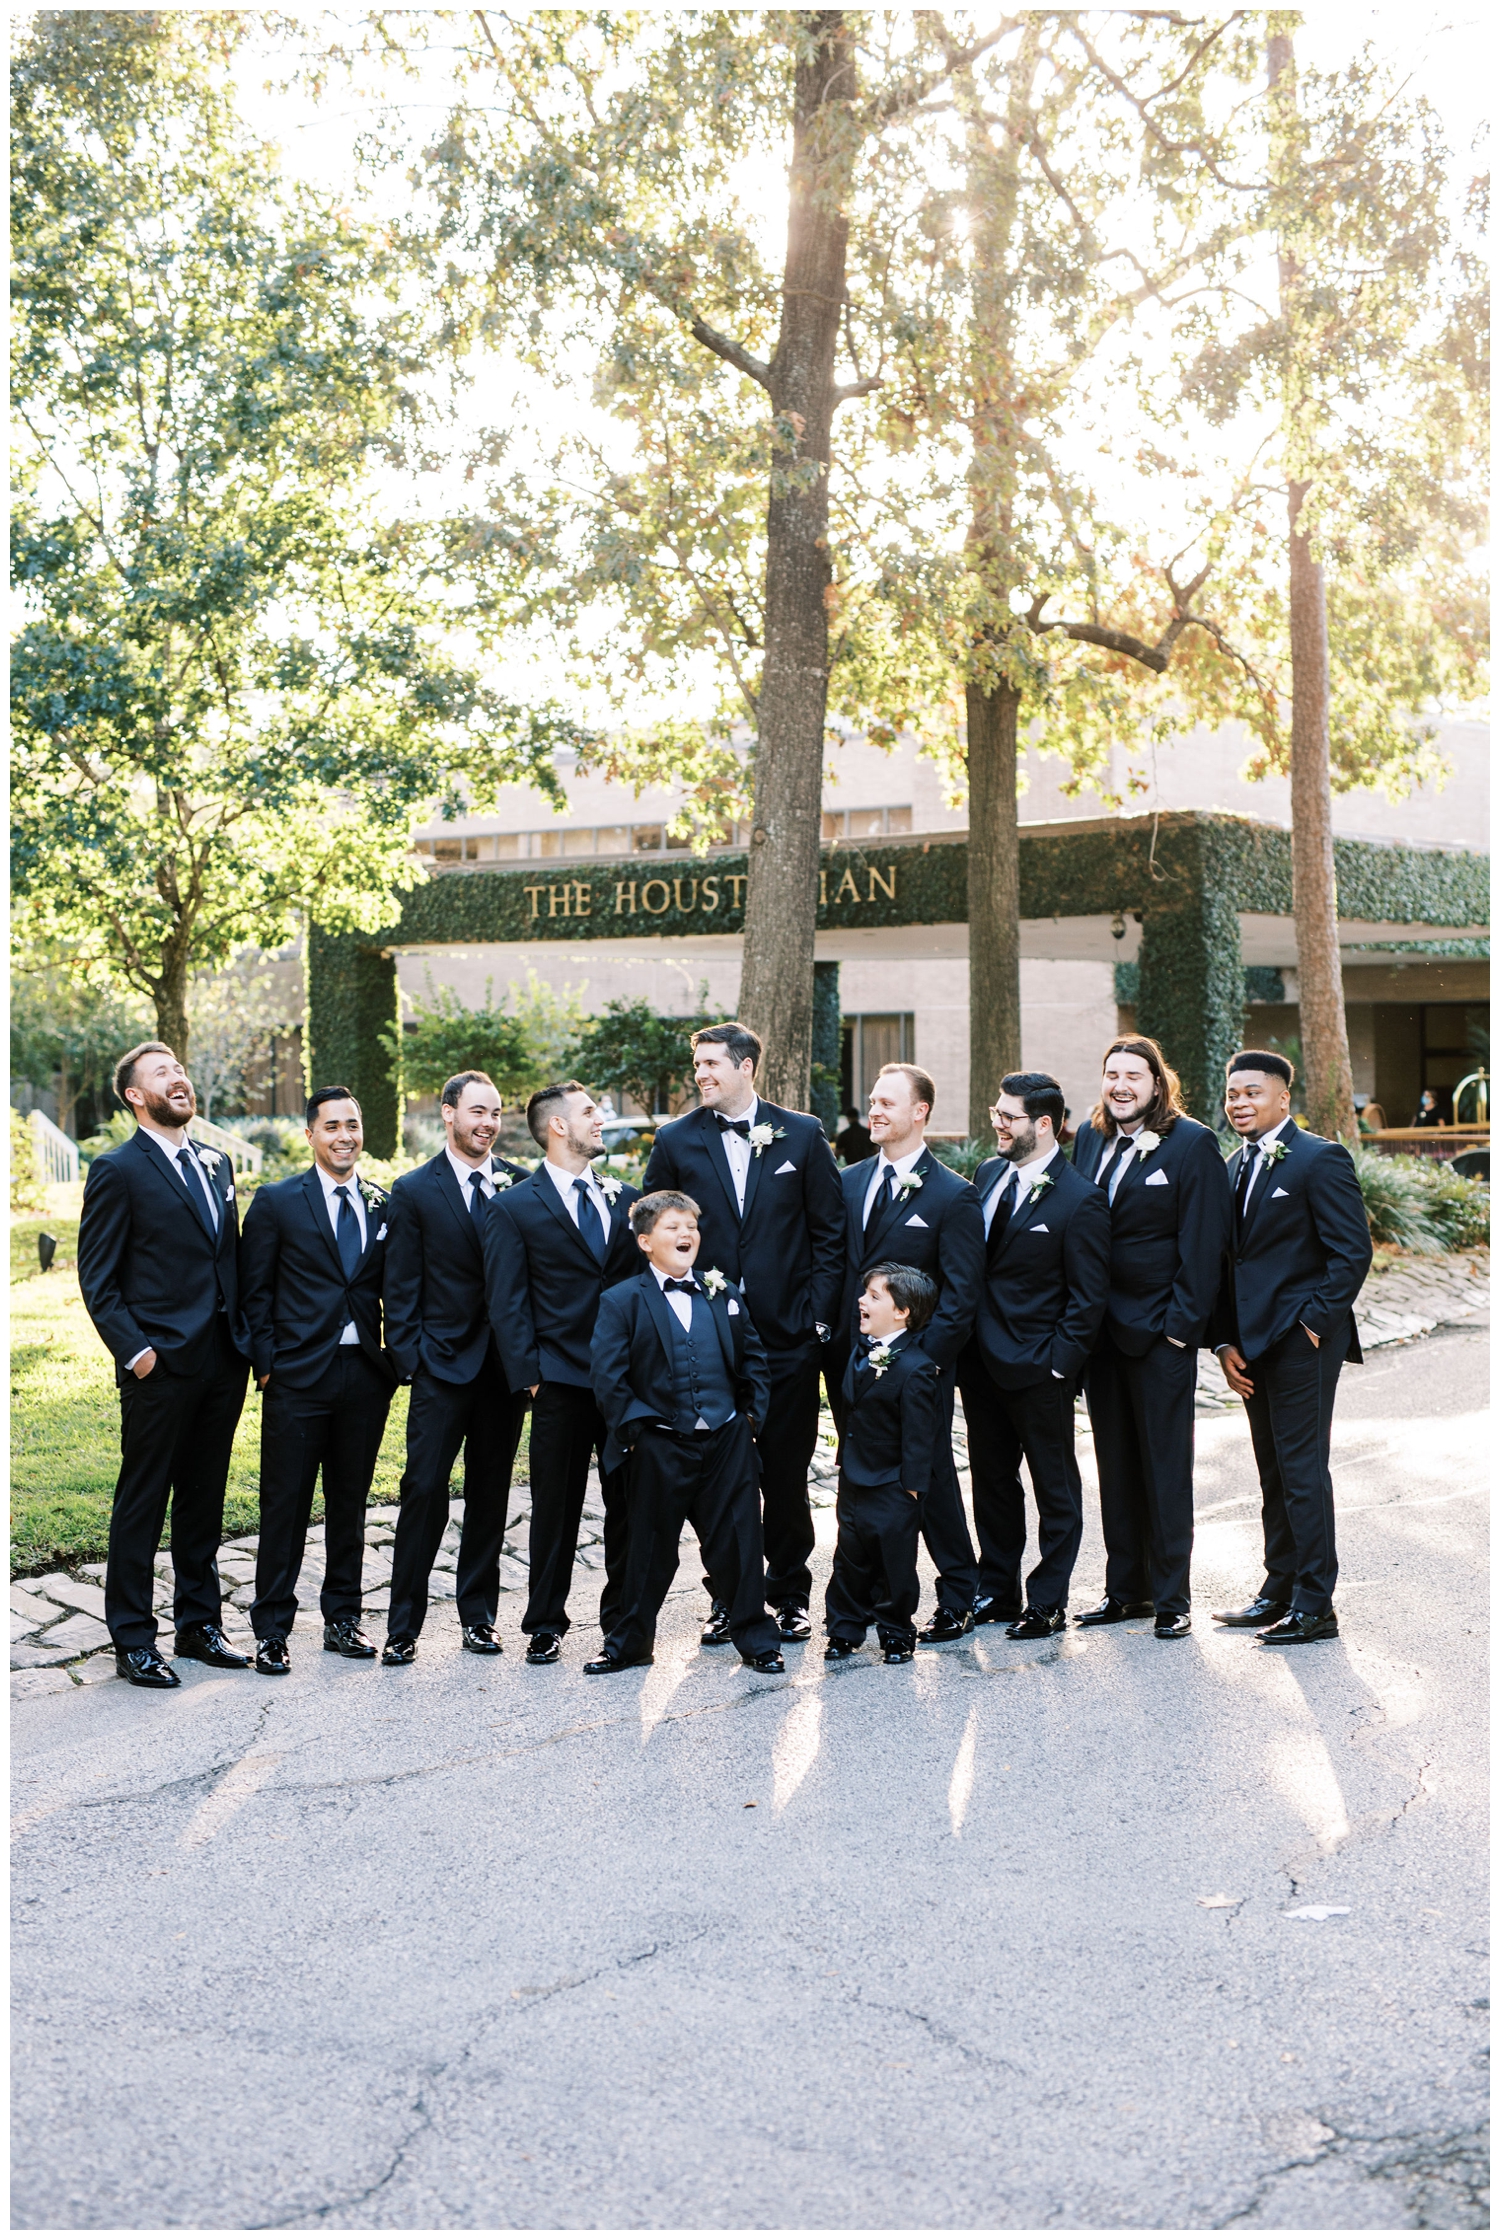 groom and groomsmen in black tuxes standing on the lawn on the Houstonian Hotel wedding